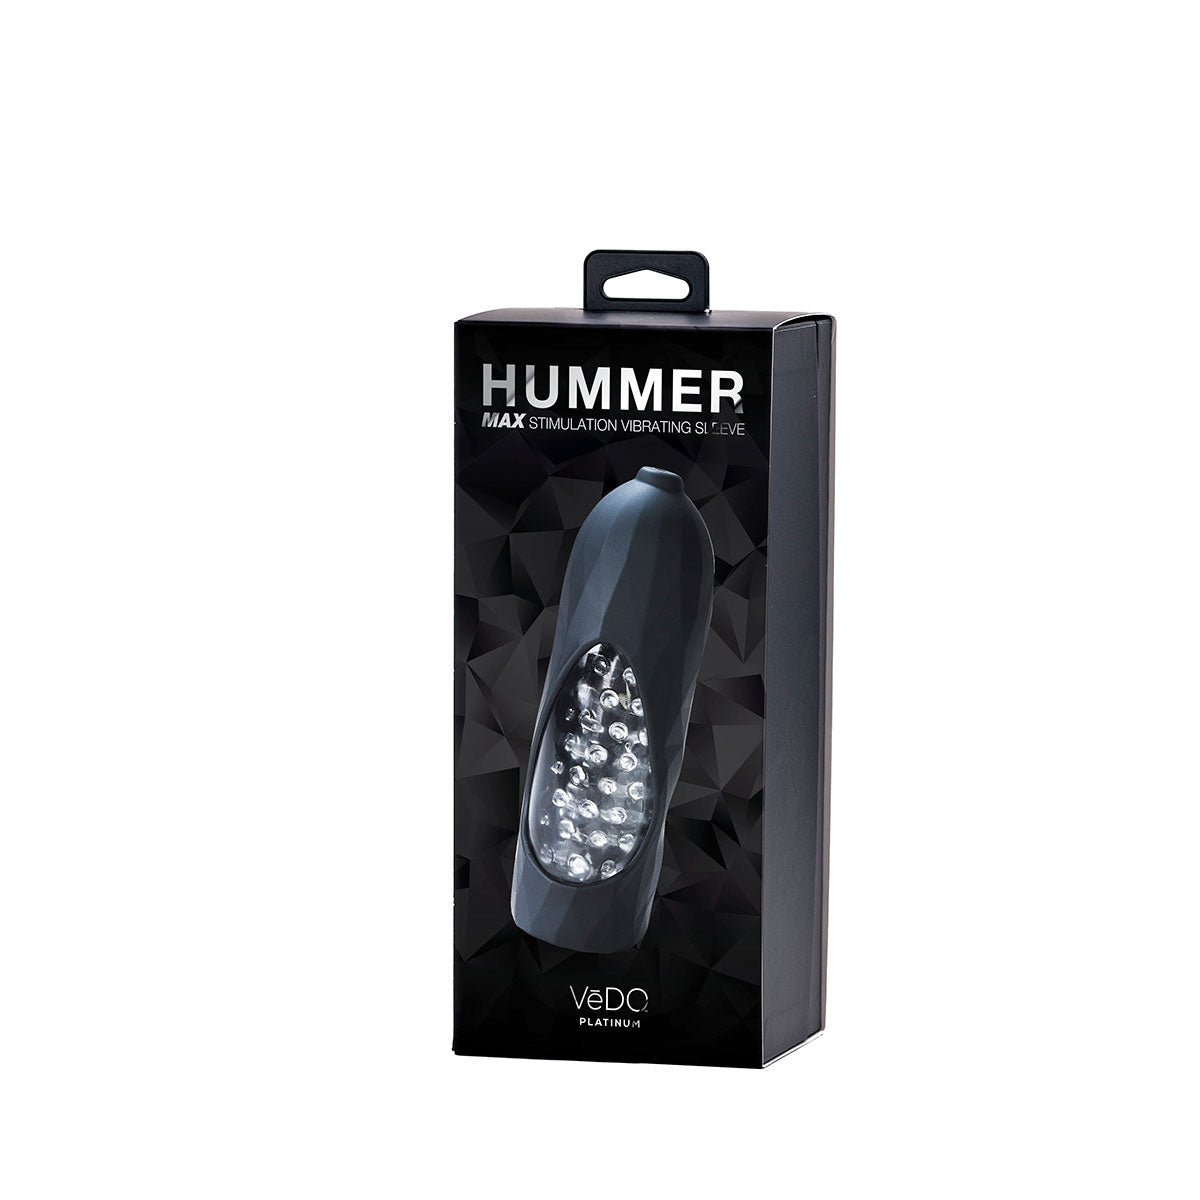 VeDO Hummer 2.0 – Rechargeable Vibrating Sleeve - Black Pearl